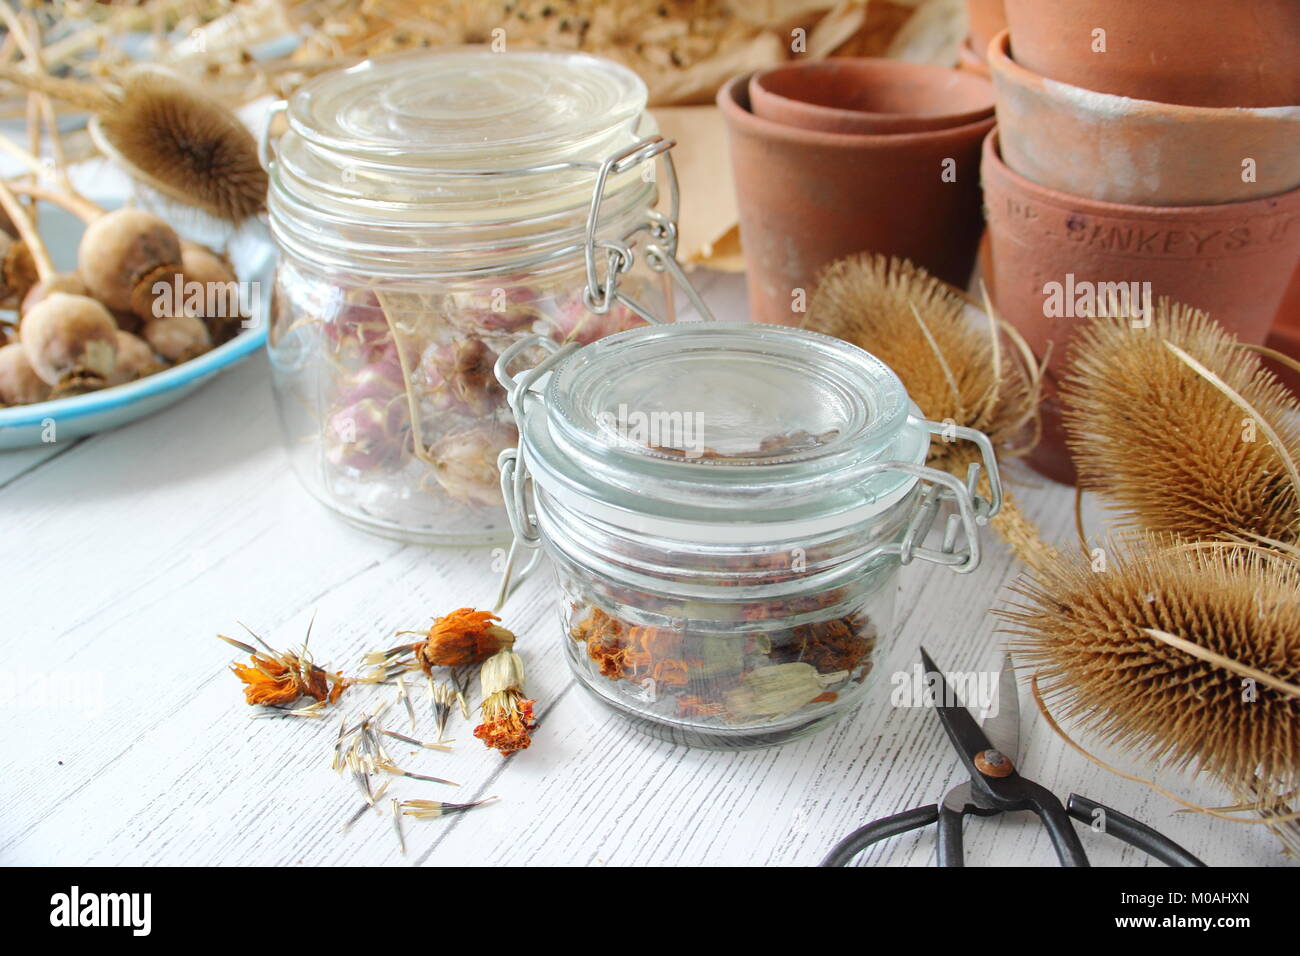 Saving and storing dried flower seeds collected from an English garden including marigold, nigella, allium, poppy and teasels, into airtight glass jar Stock Photo